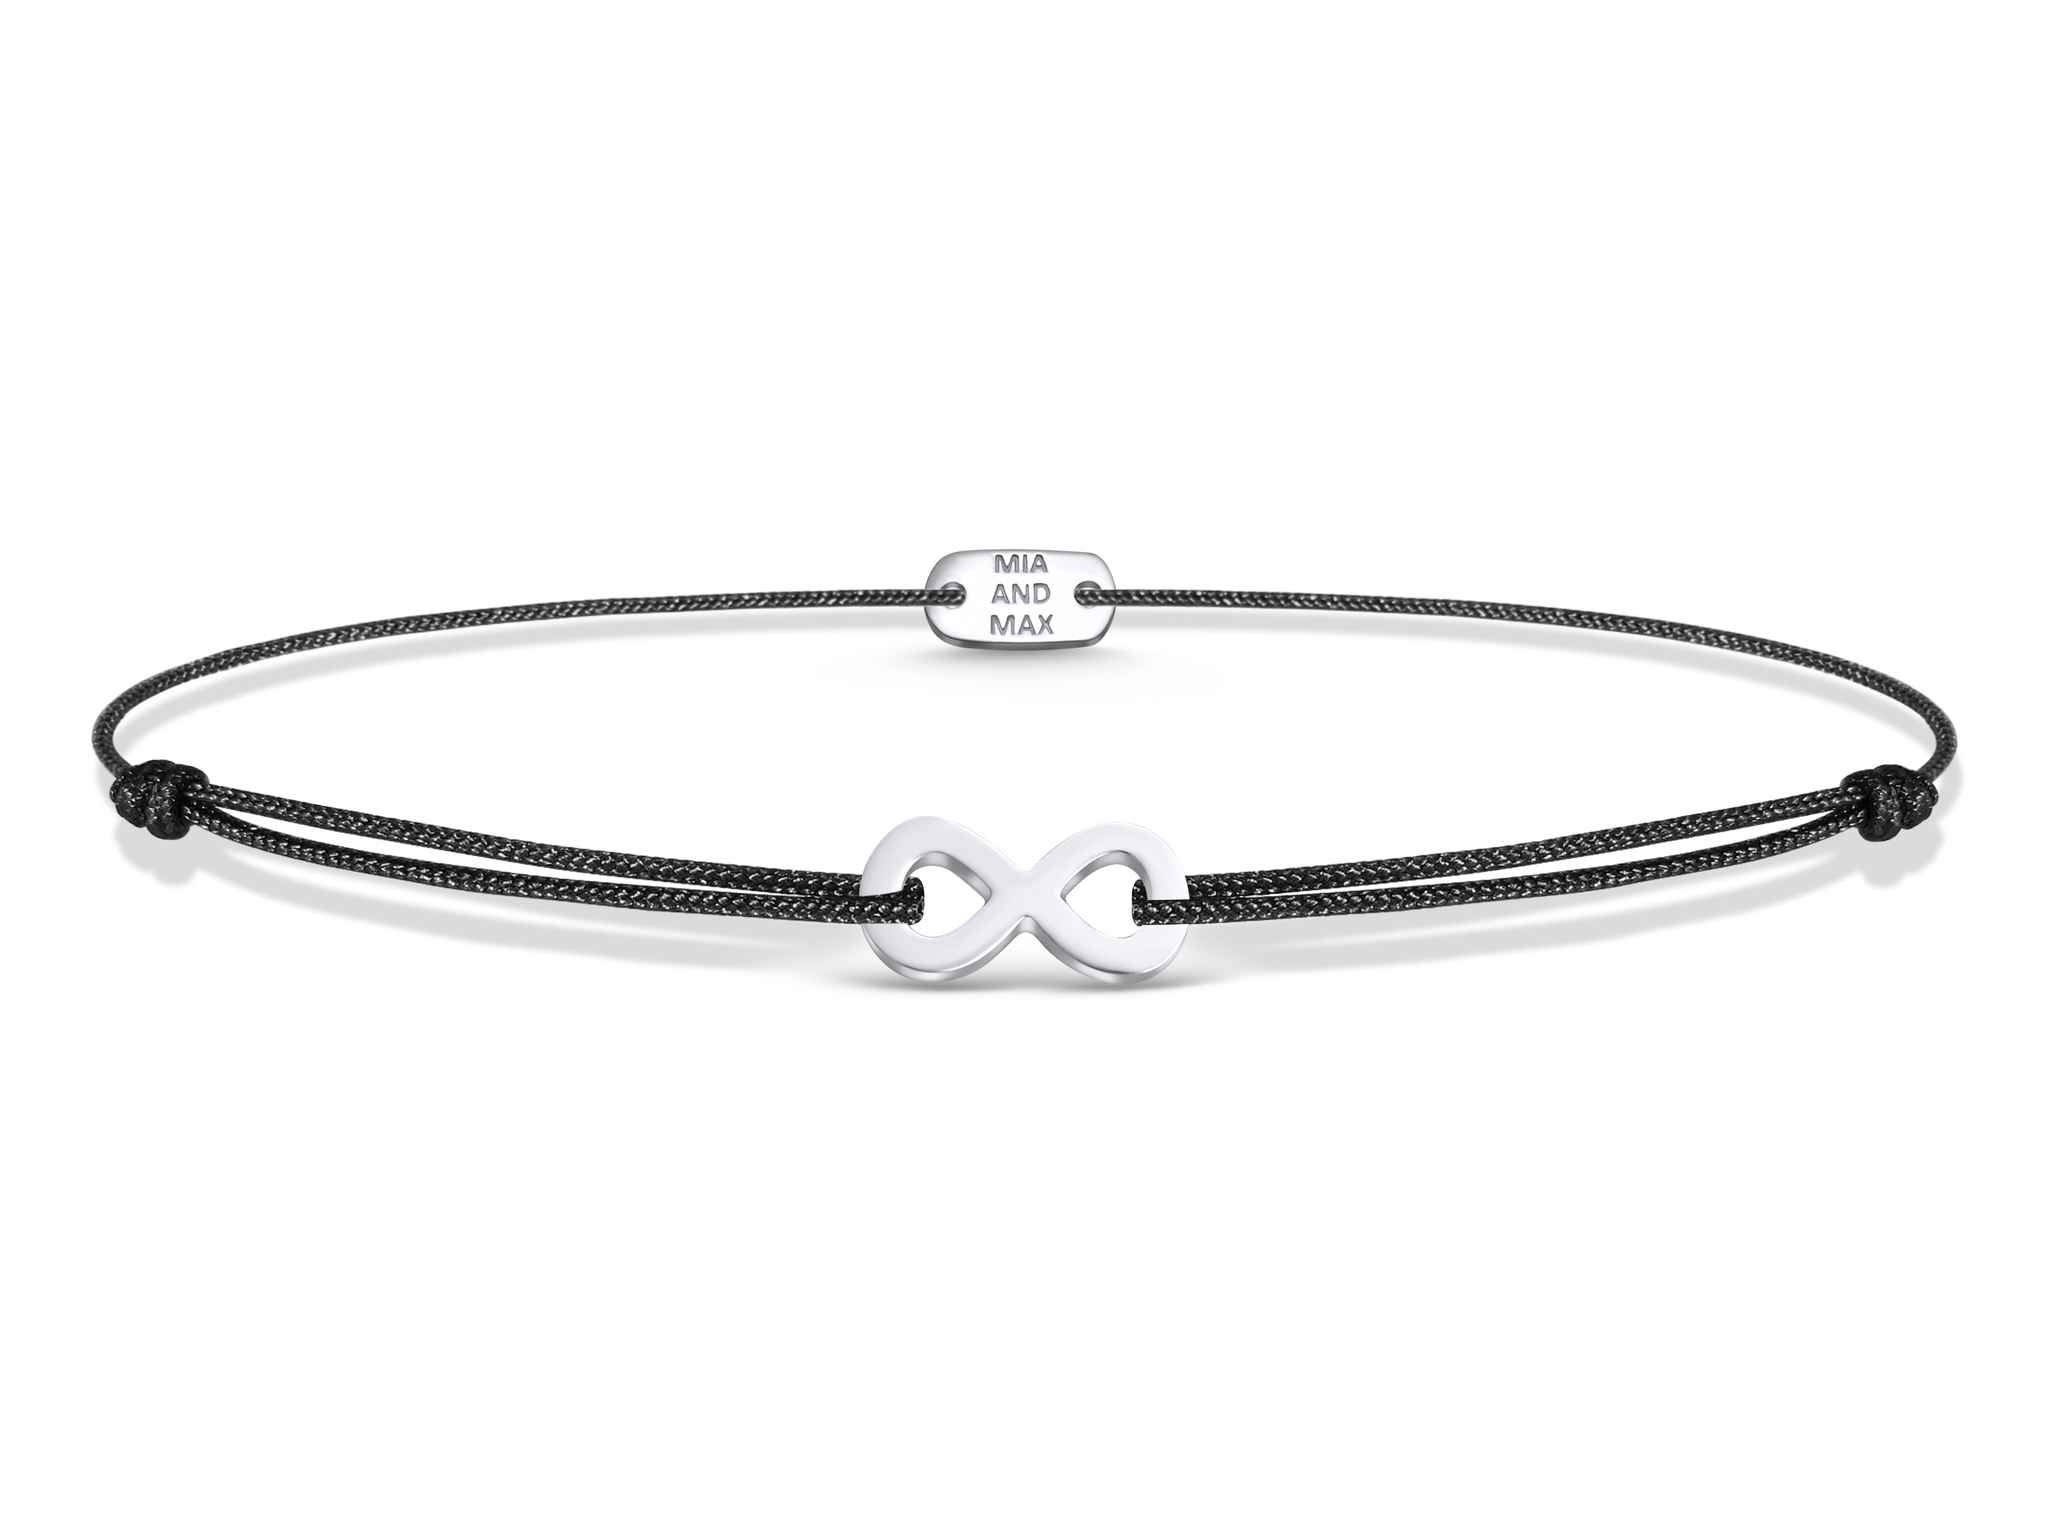 Frosted Willow Personalized Bangle Bracelets and Charm Bangles –  FrostedWillow